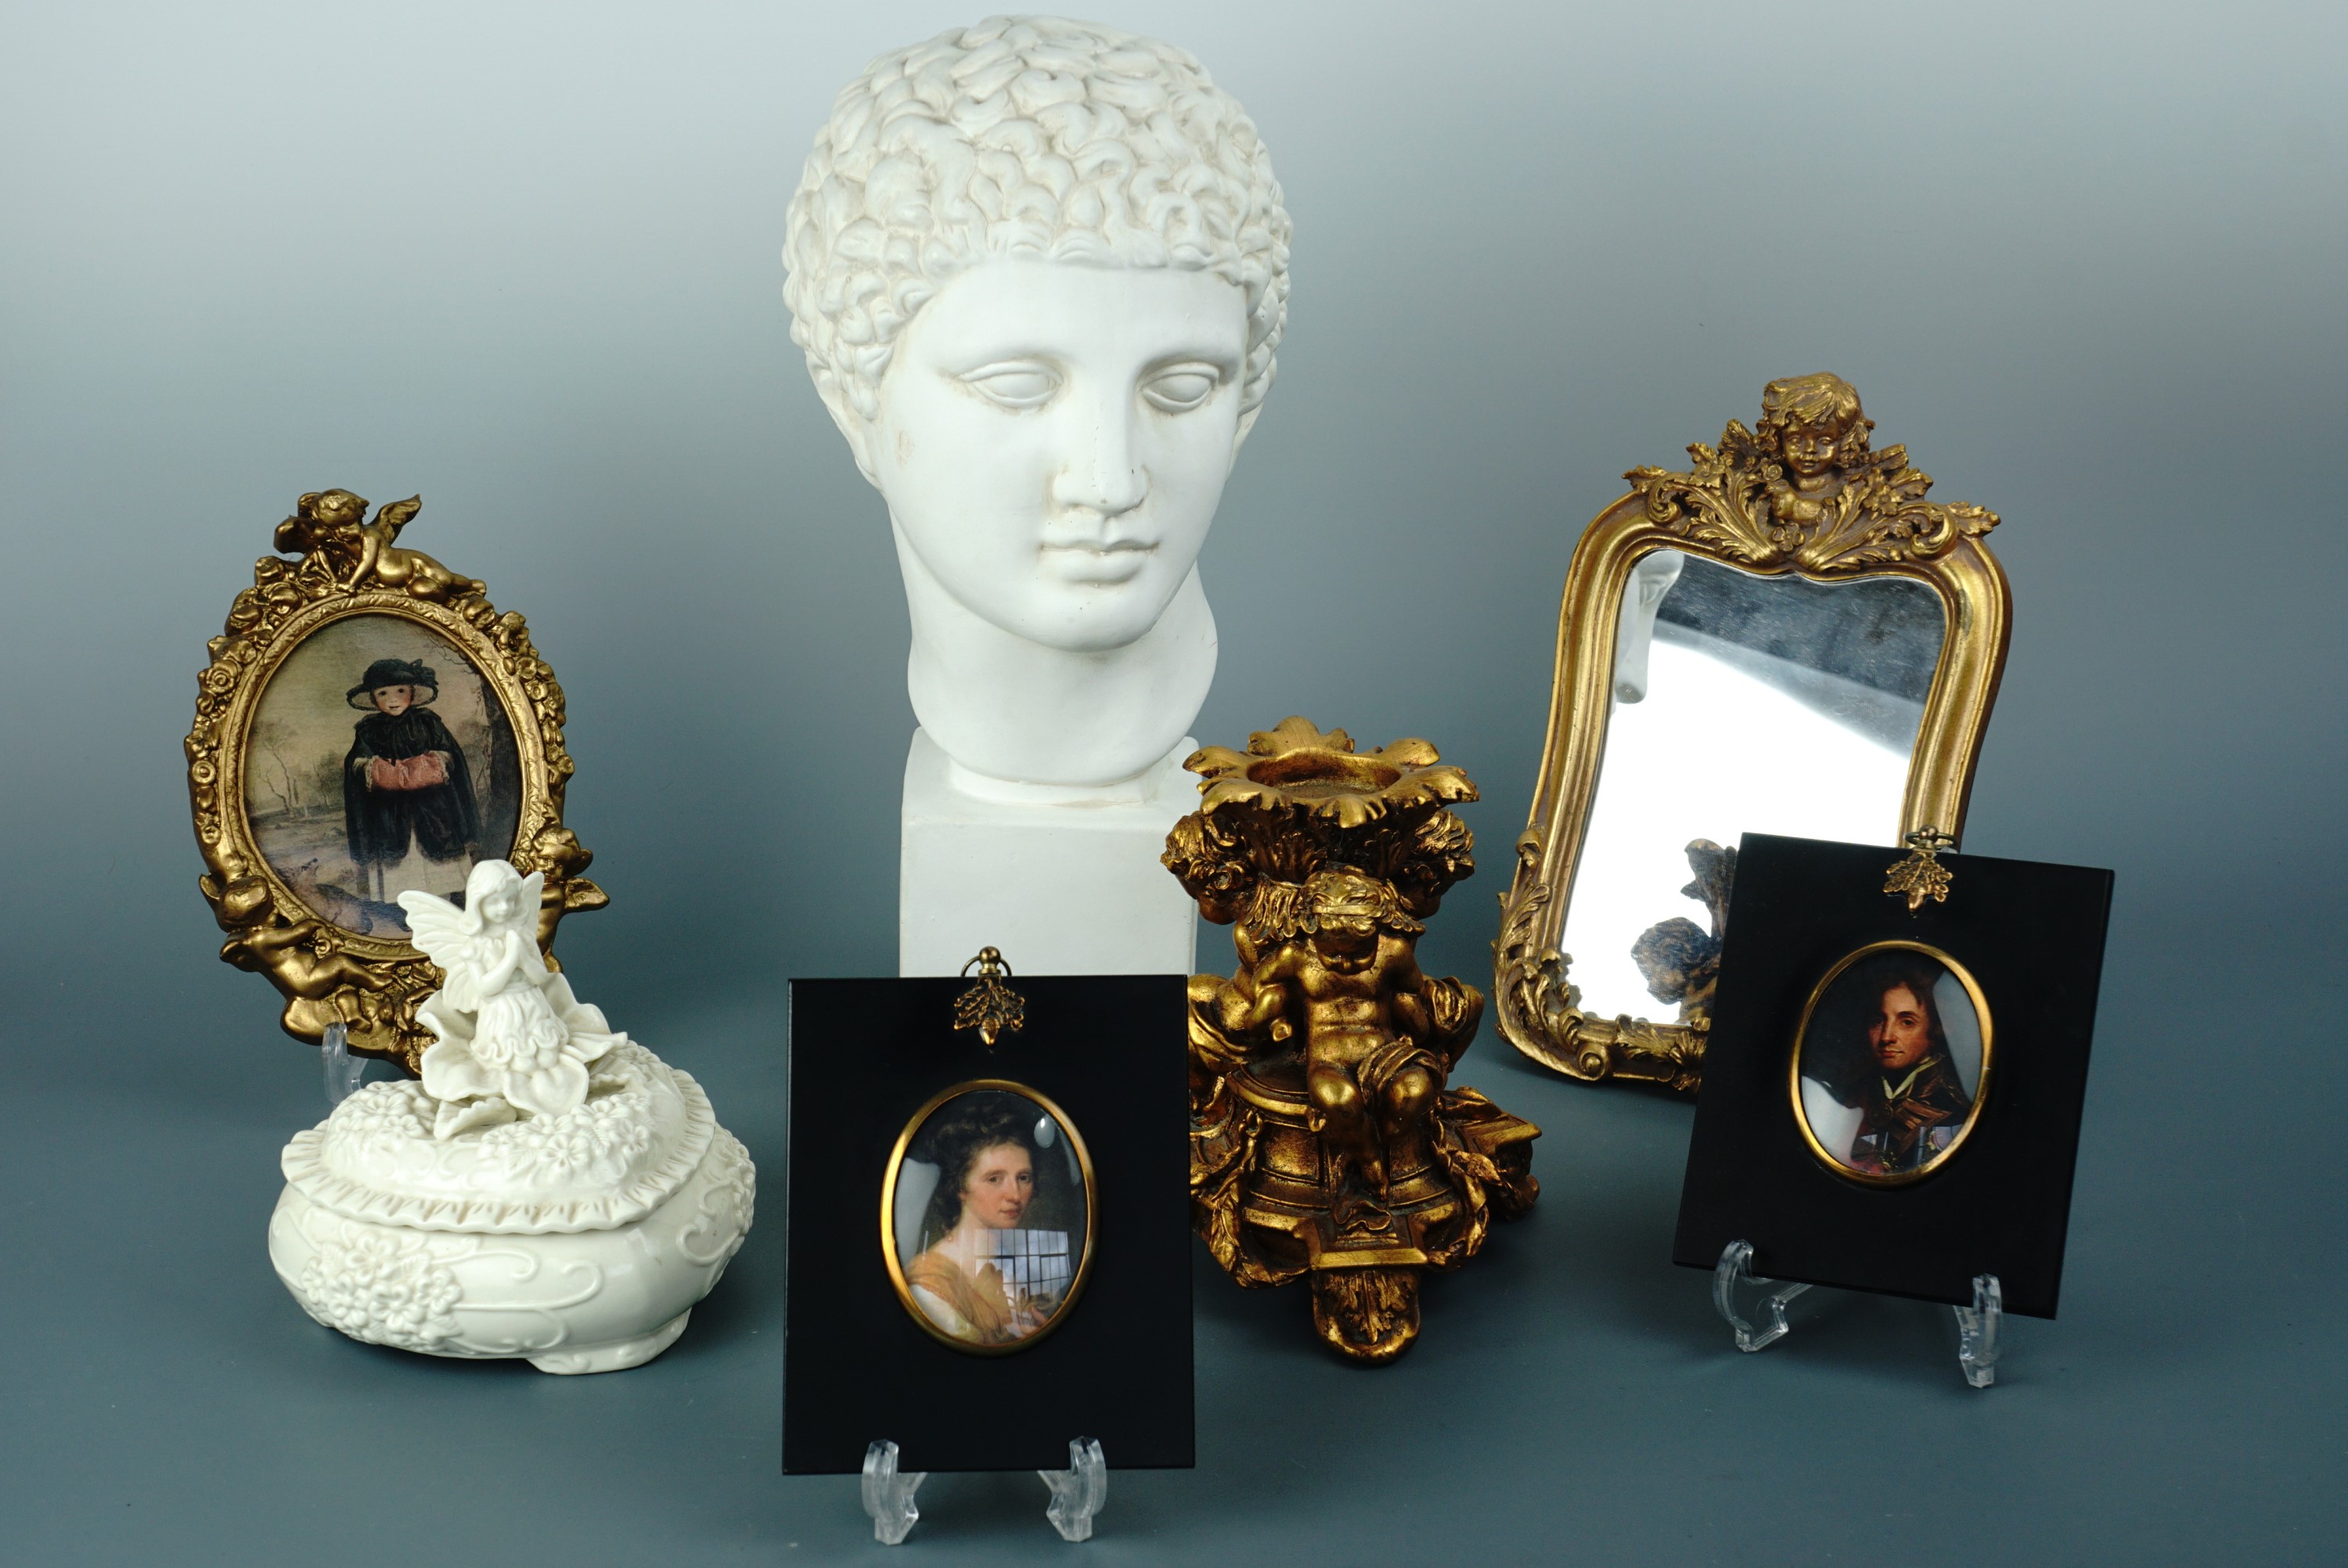 Contemporary decorative furnishing items including a reproduction classical bust, portrait - Image 2 of 5